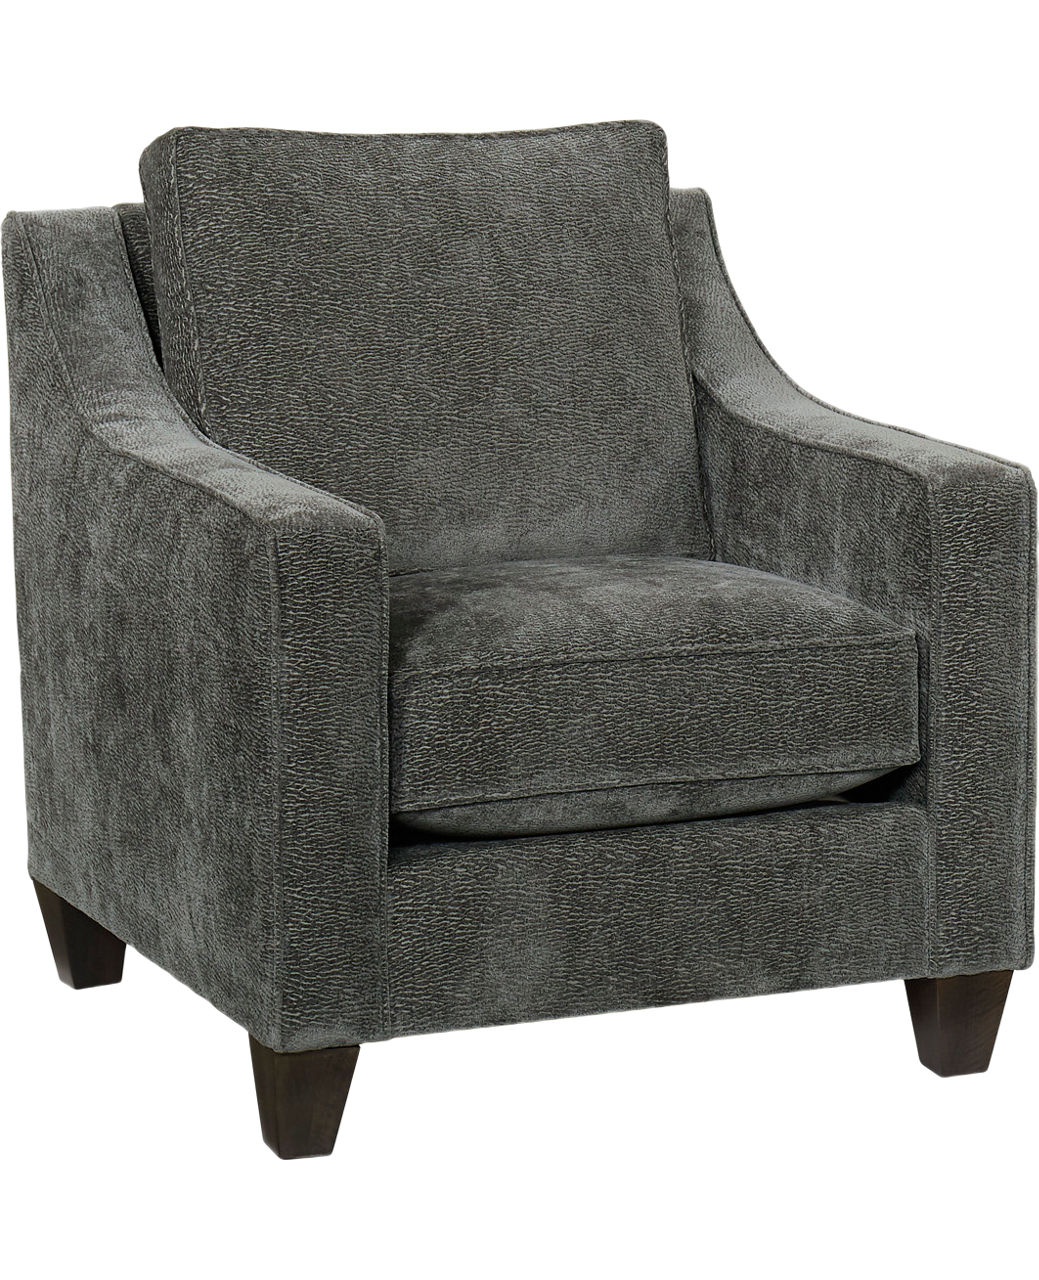 Havertys Laney Accent Chair In Gray